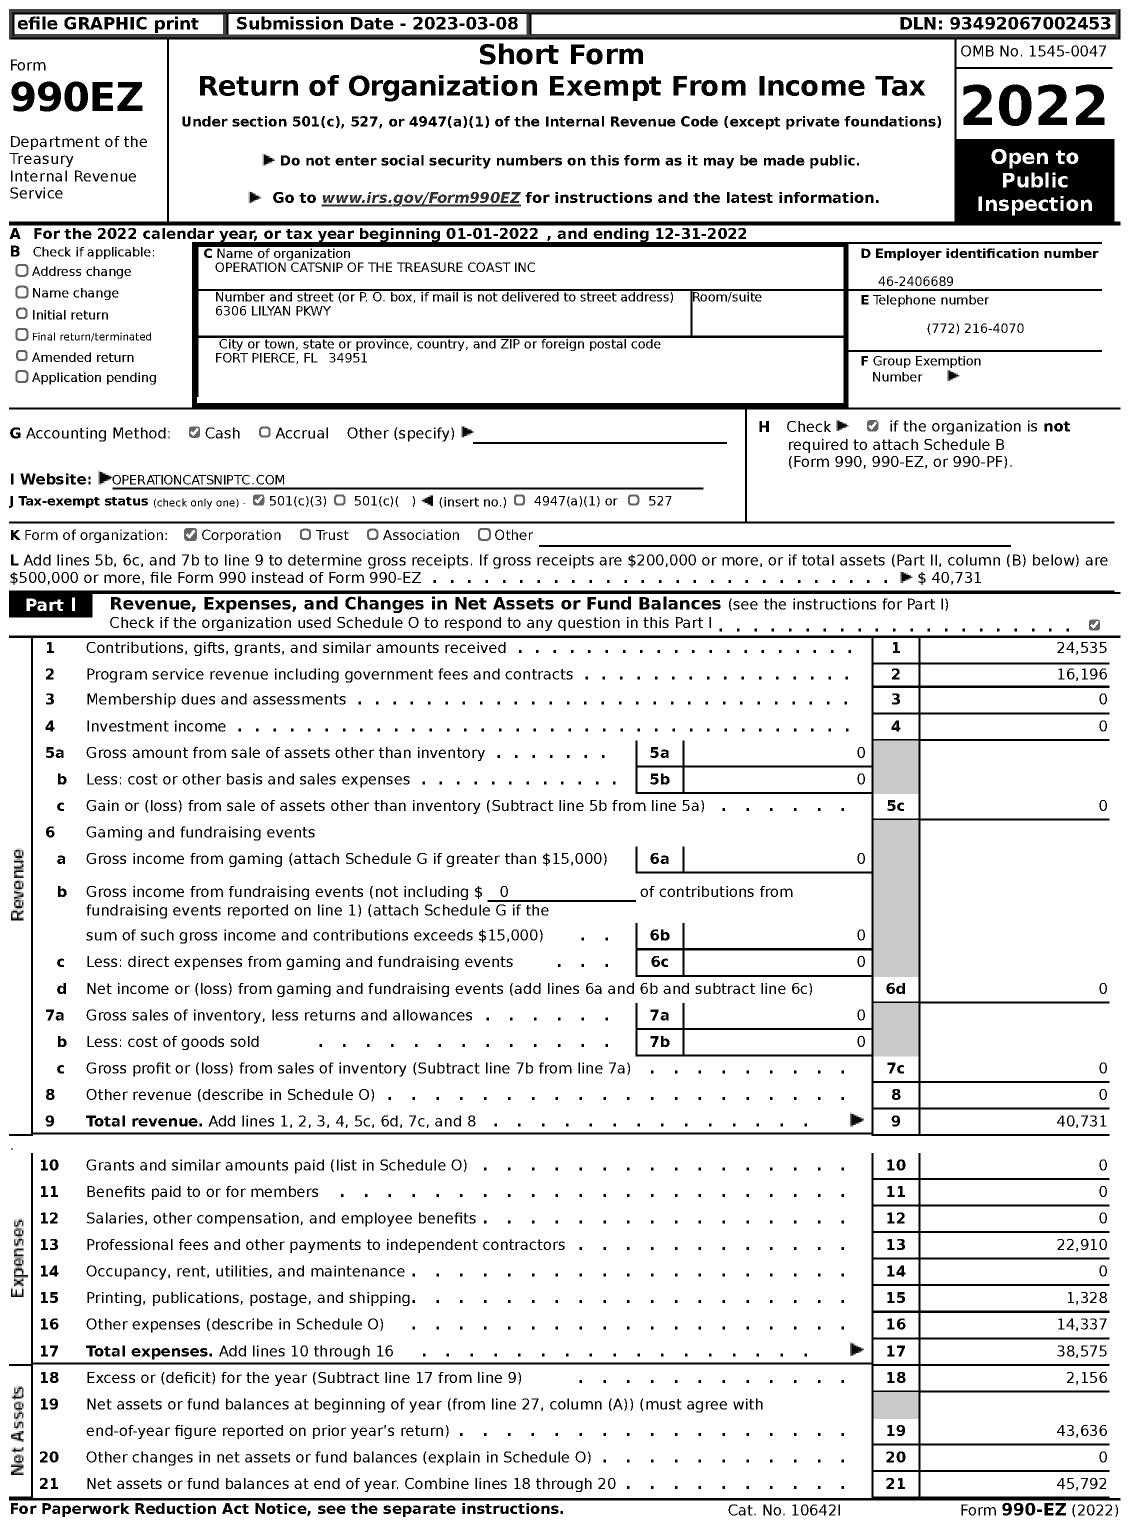 Image of first page of 2022 Form 990EZ for Operation Catsnip of the Treasure Coast